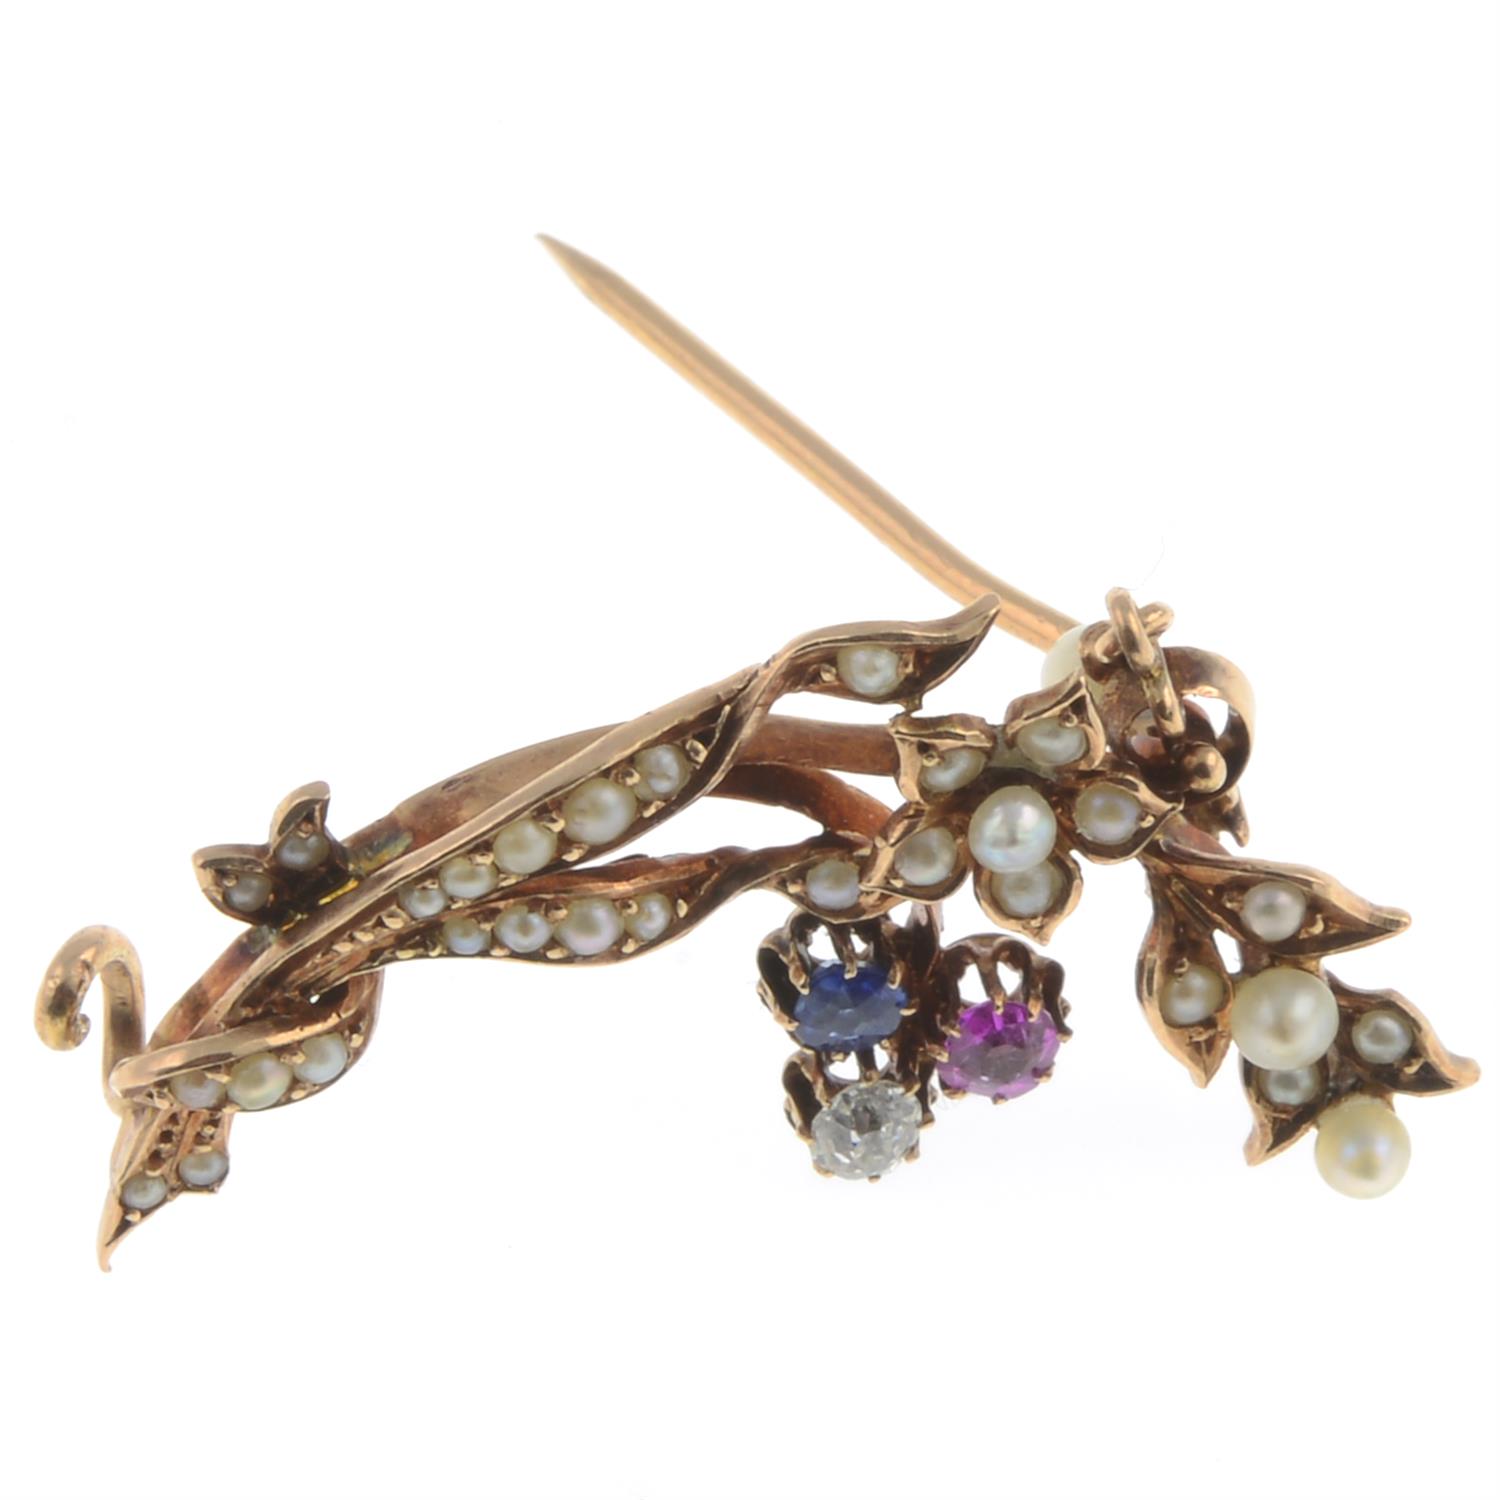 Early 20th gold diamond & gem floral brooch - Image 2 of 2